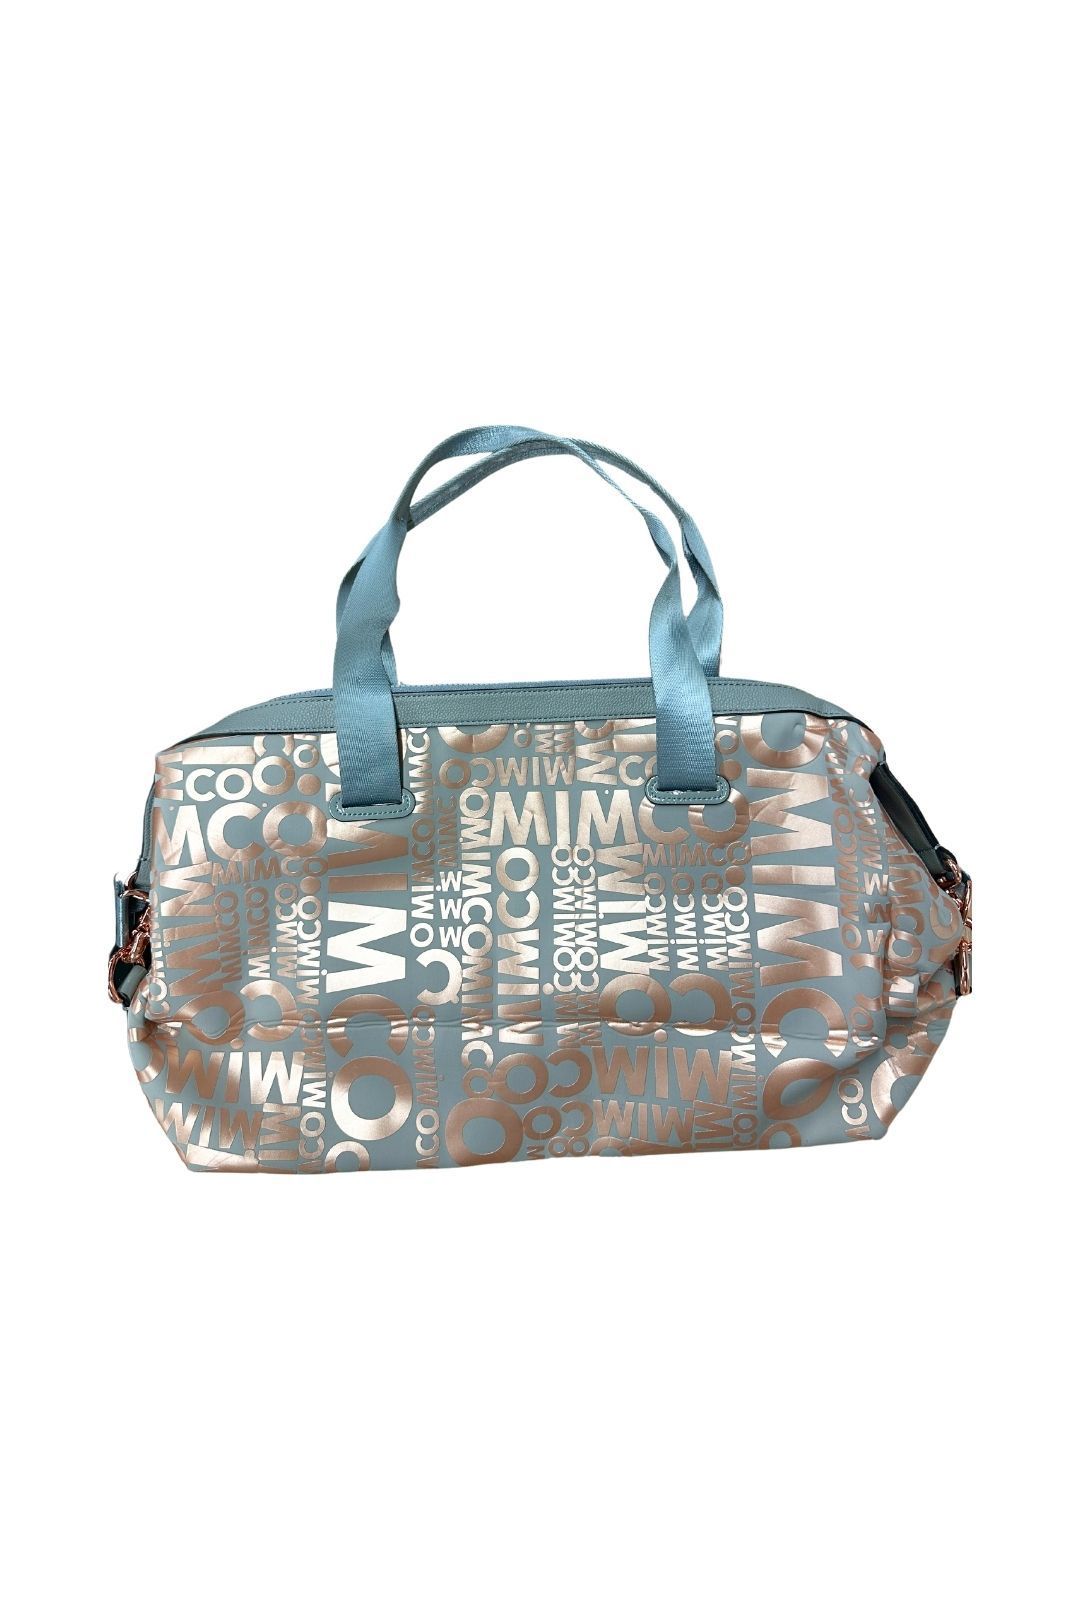 Mimco in Grey and Gold Weekender Bag